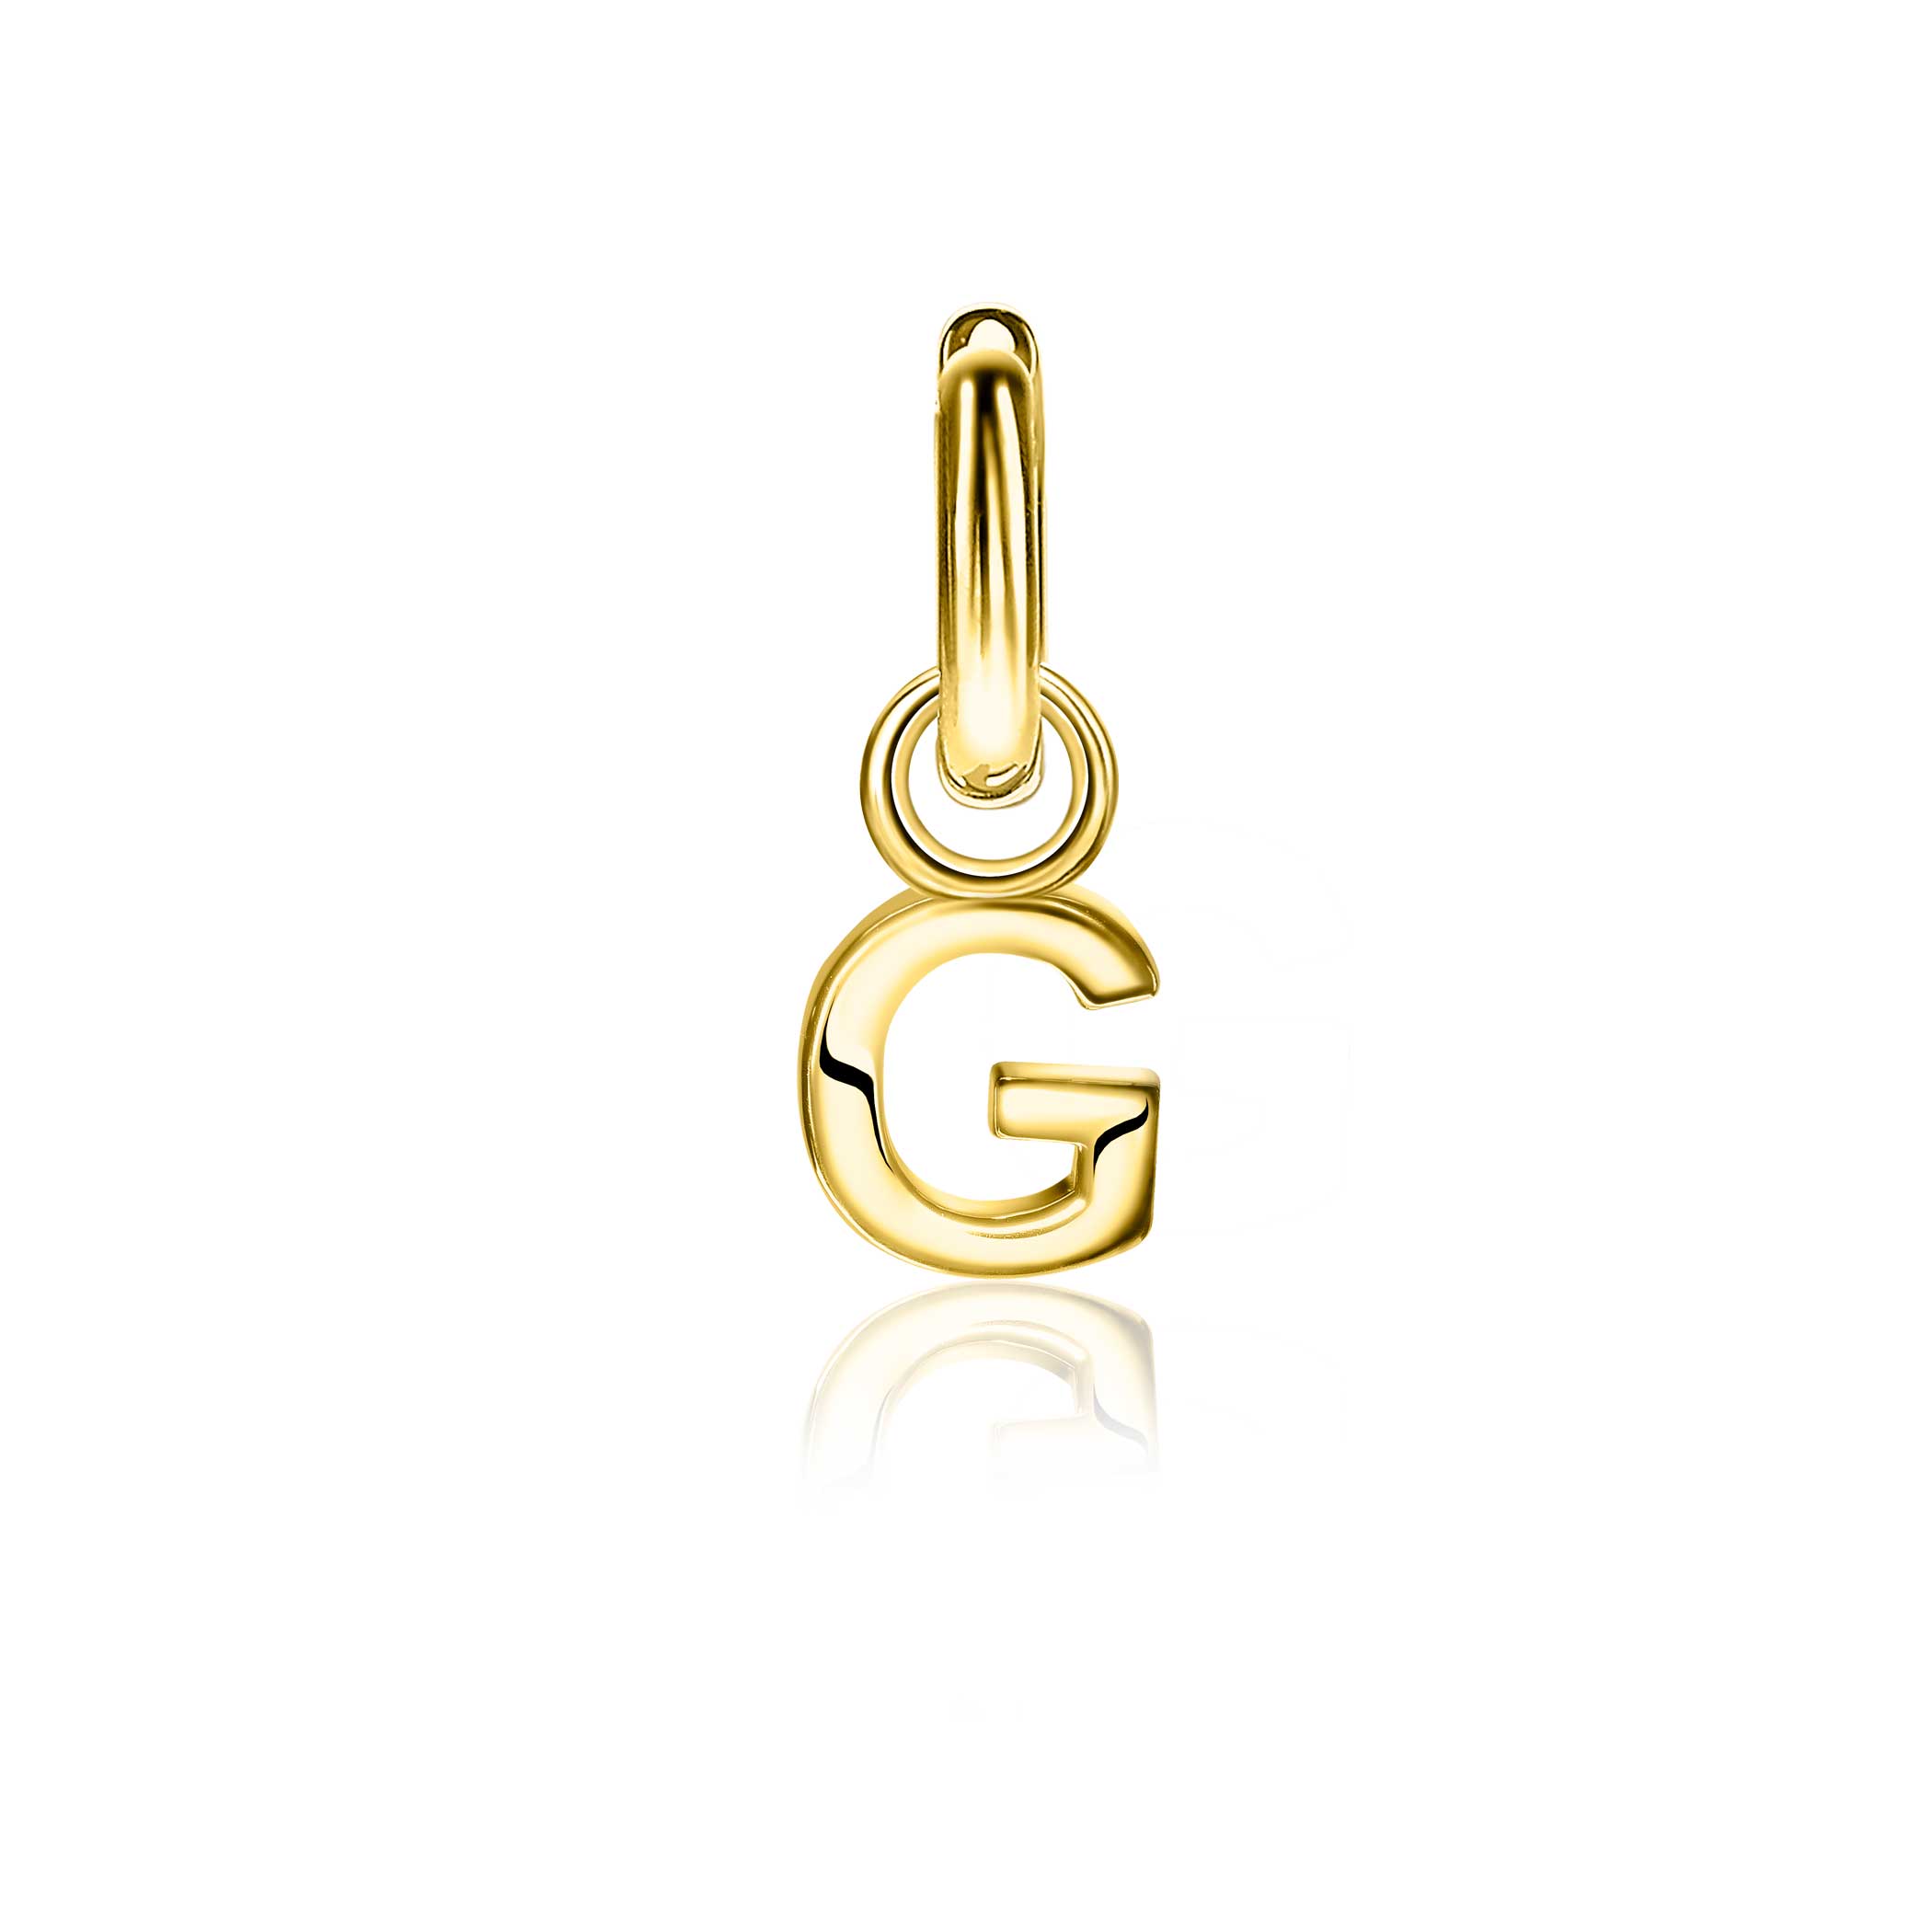 ZINZI Gold Plated Letter Earrings Pendant G price per piece ZICH2145G (excl. hoop earrings)